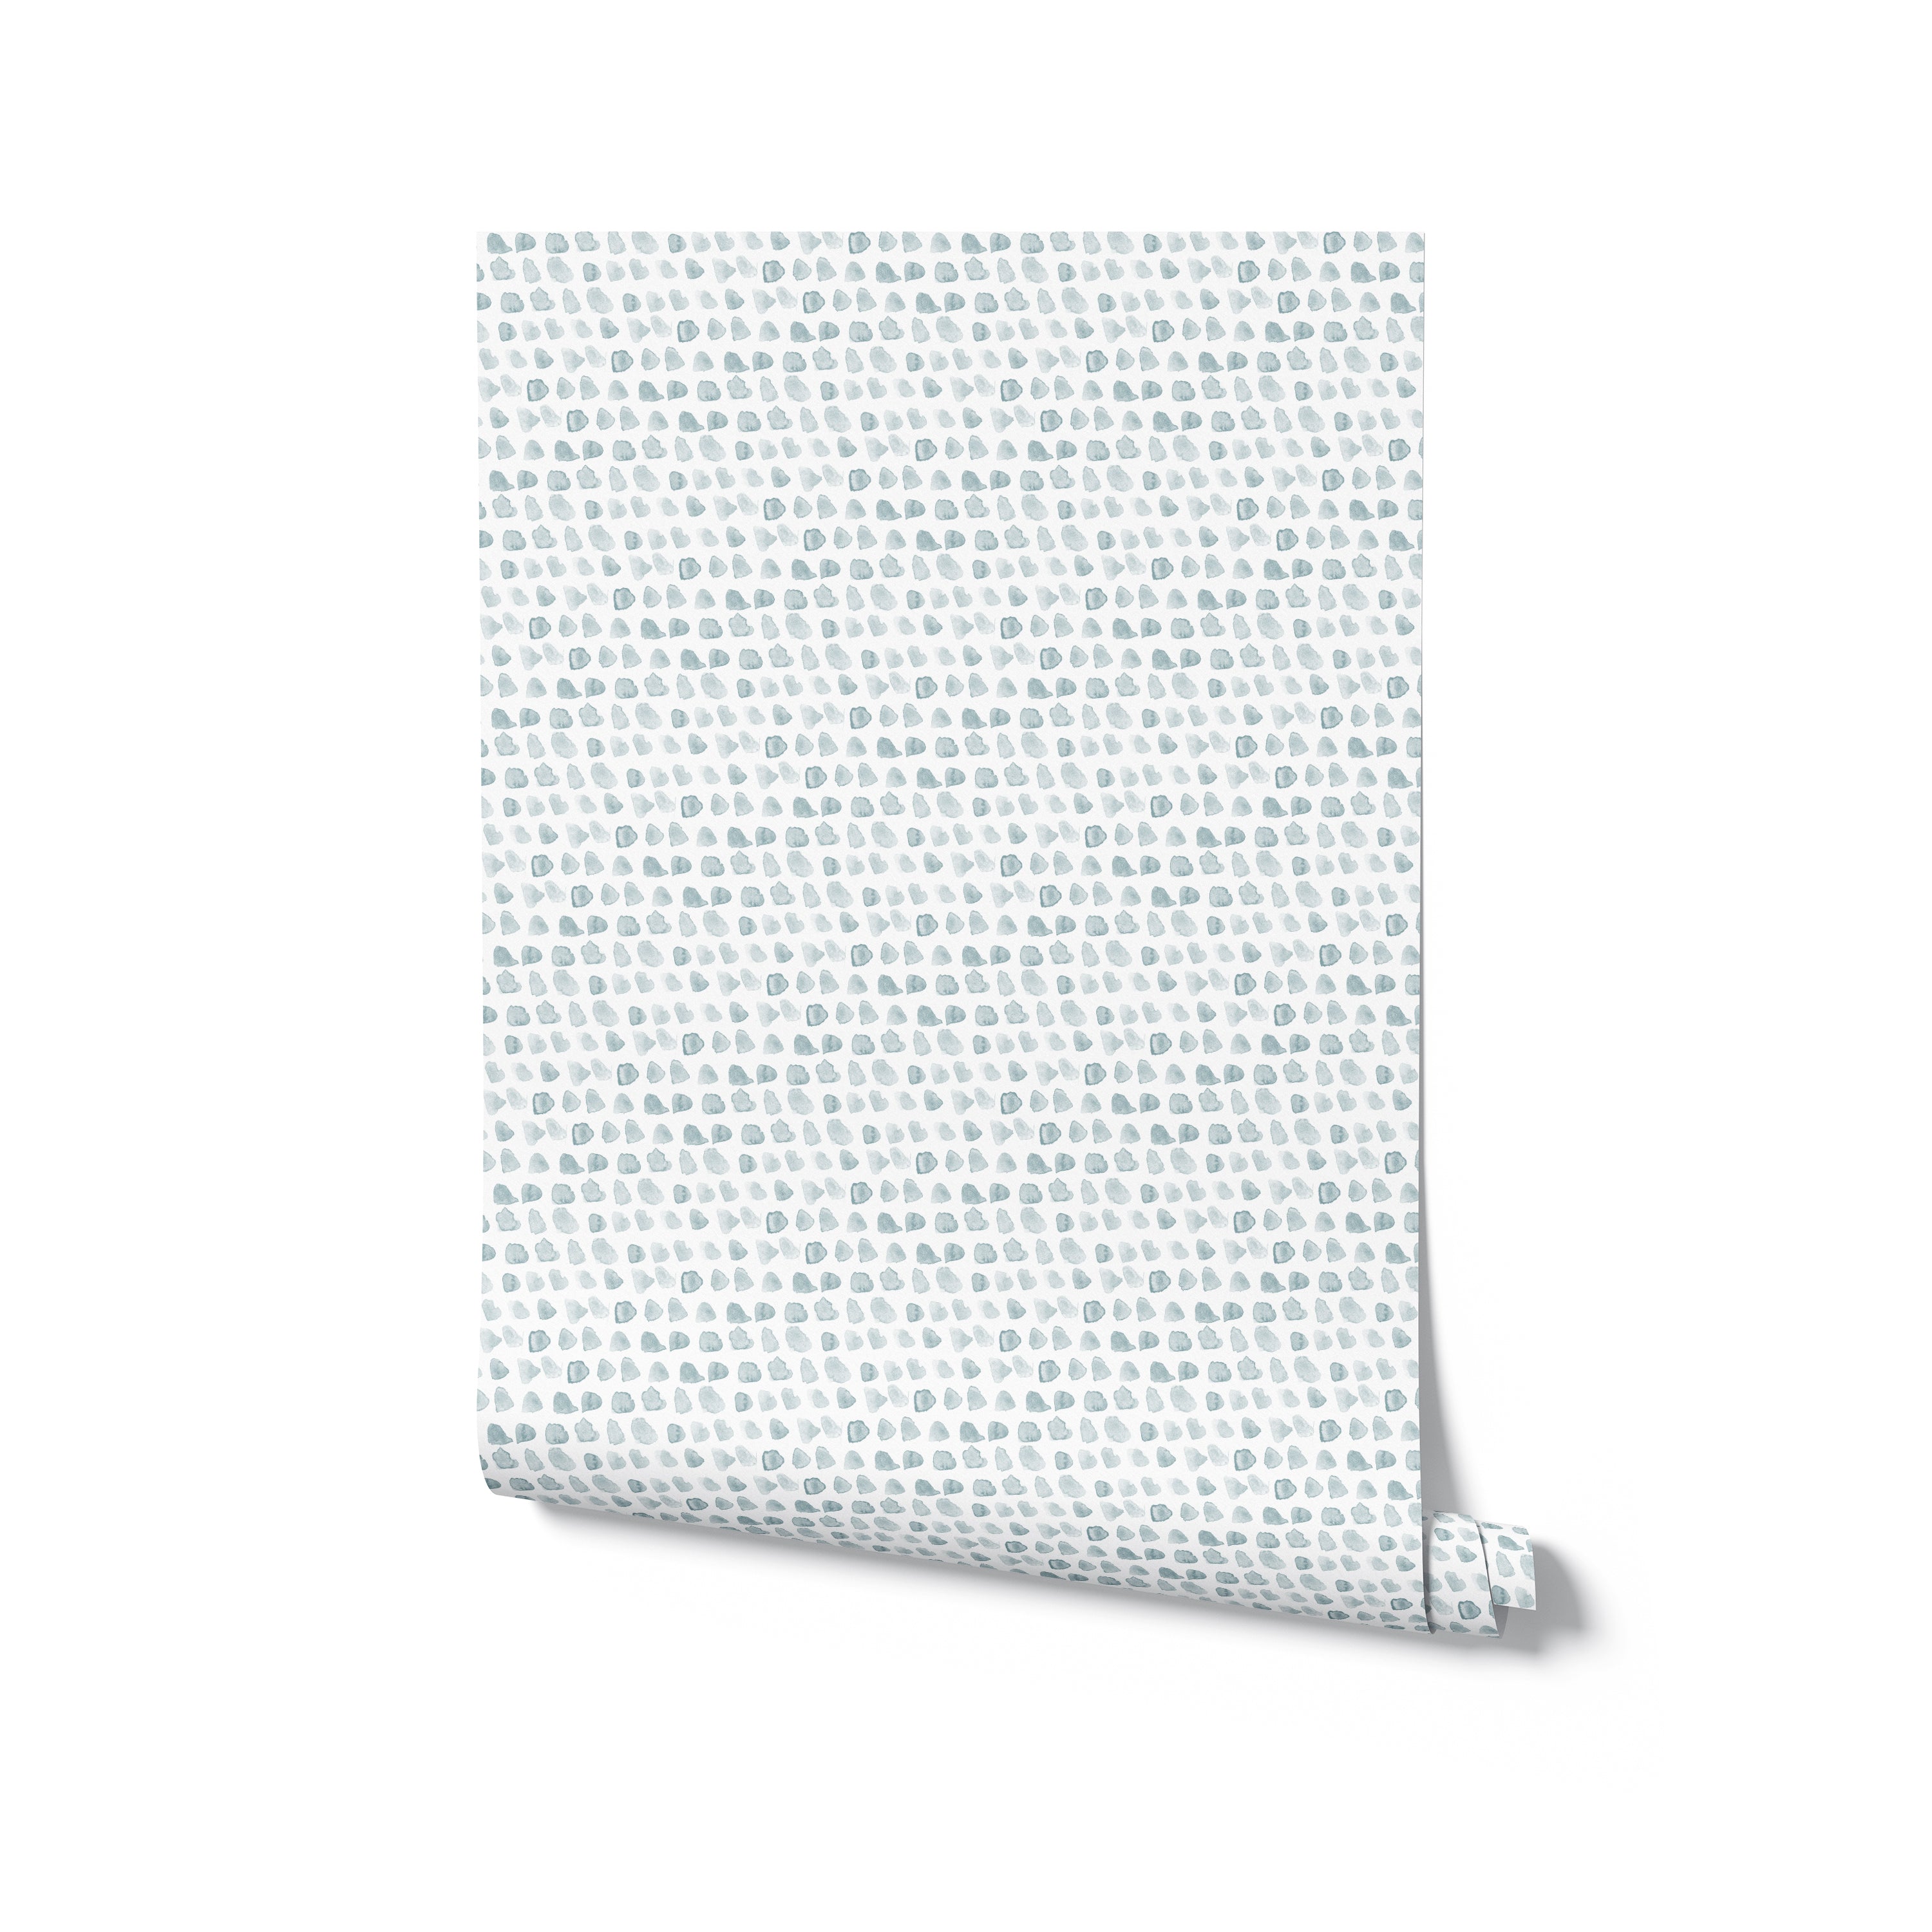 A realistic mockup of the Handpainted Dots Wallpaper rolled up and standing against a white background. The wallpaper features a delicate pattern of painted dots on a blue smoke surface, illustrating the wallpaper's texture and color as it would appear when applied to a wall.